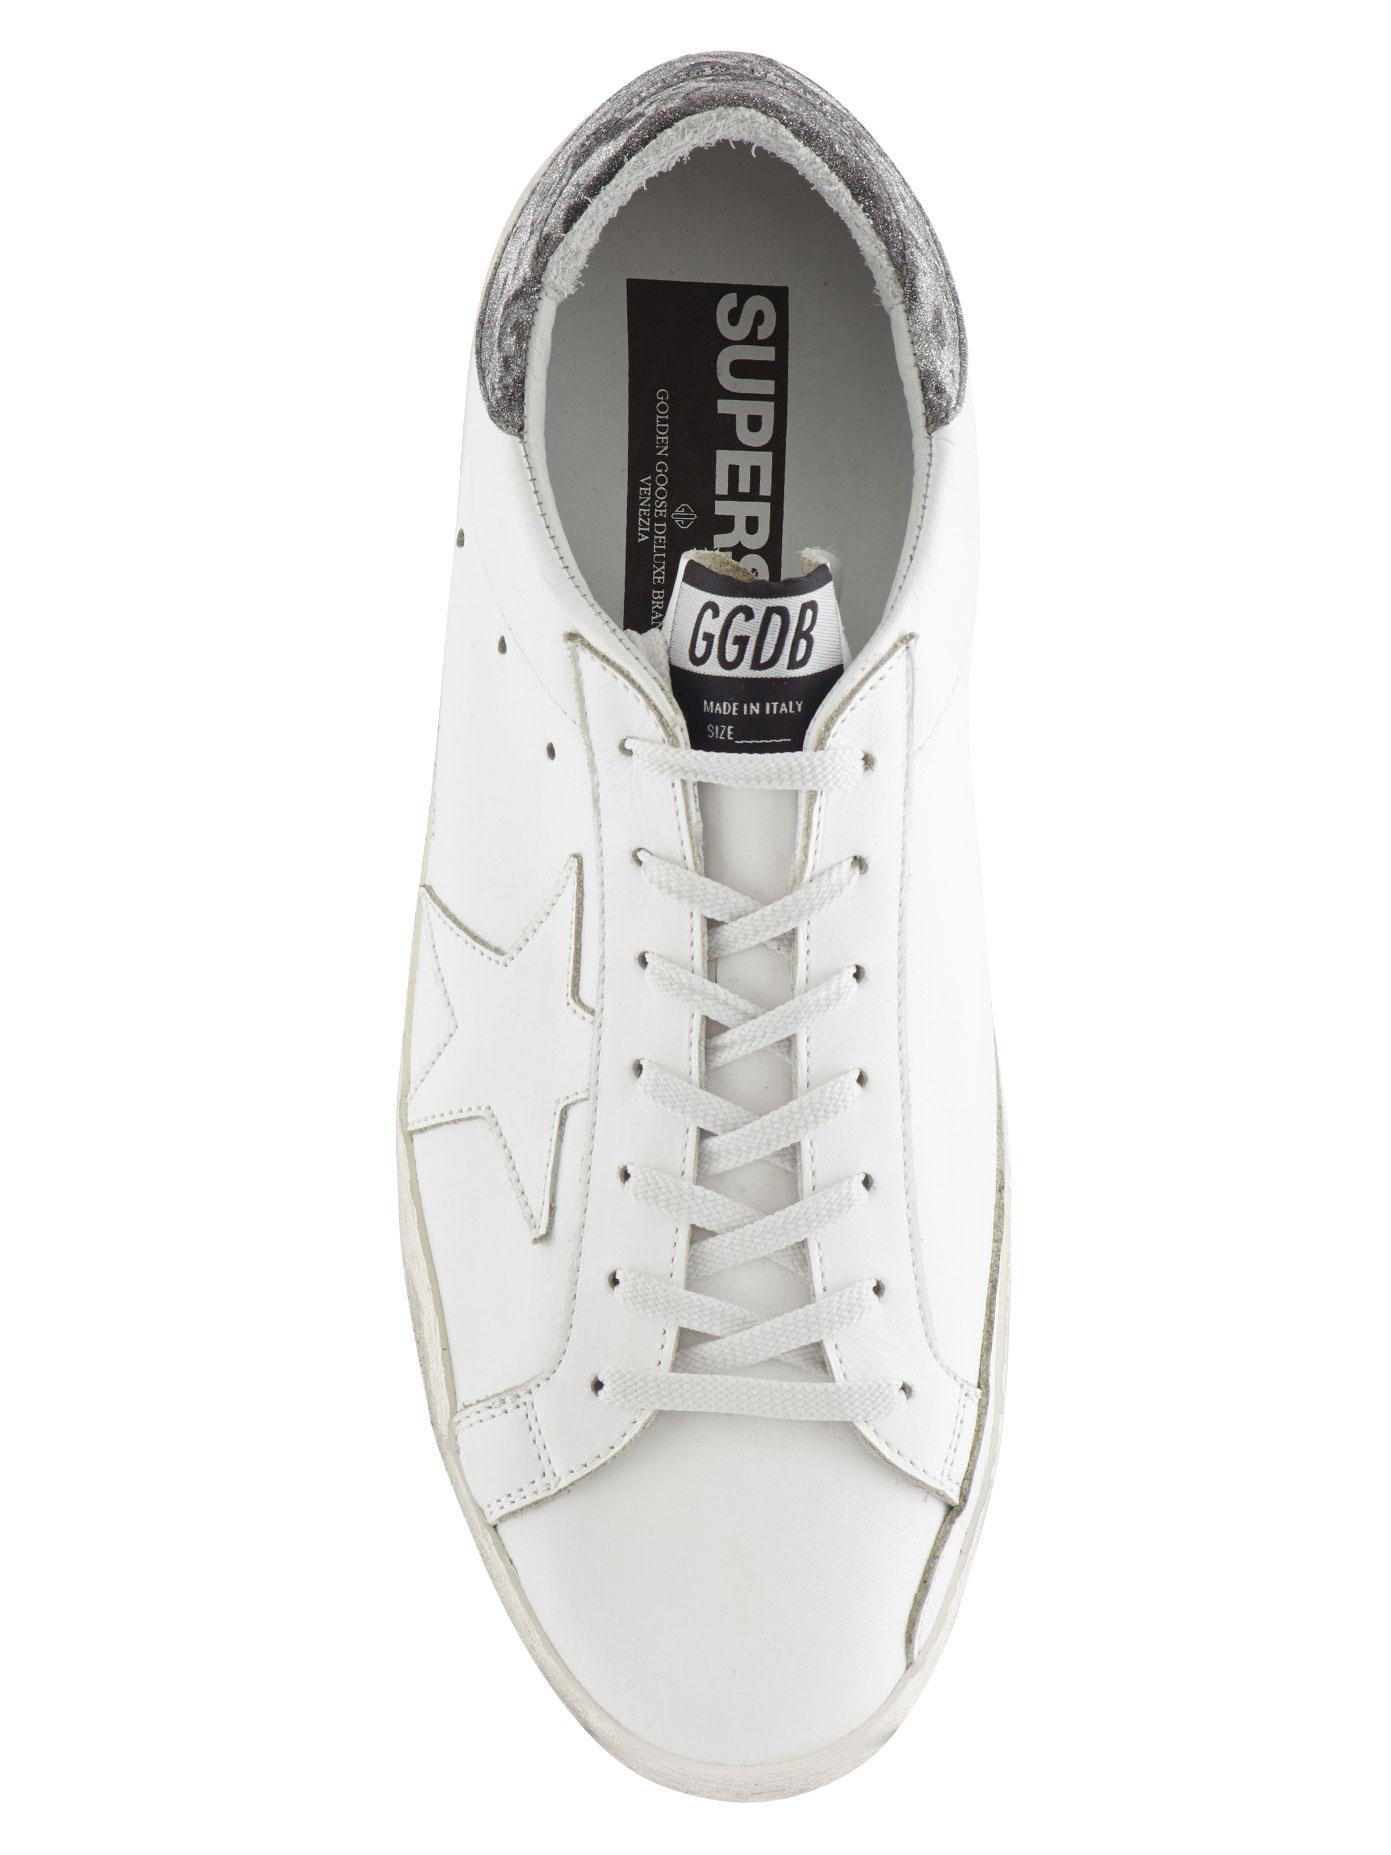 Golden Goose Superstar Landed Edition Leather Sneakers in White 